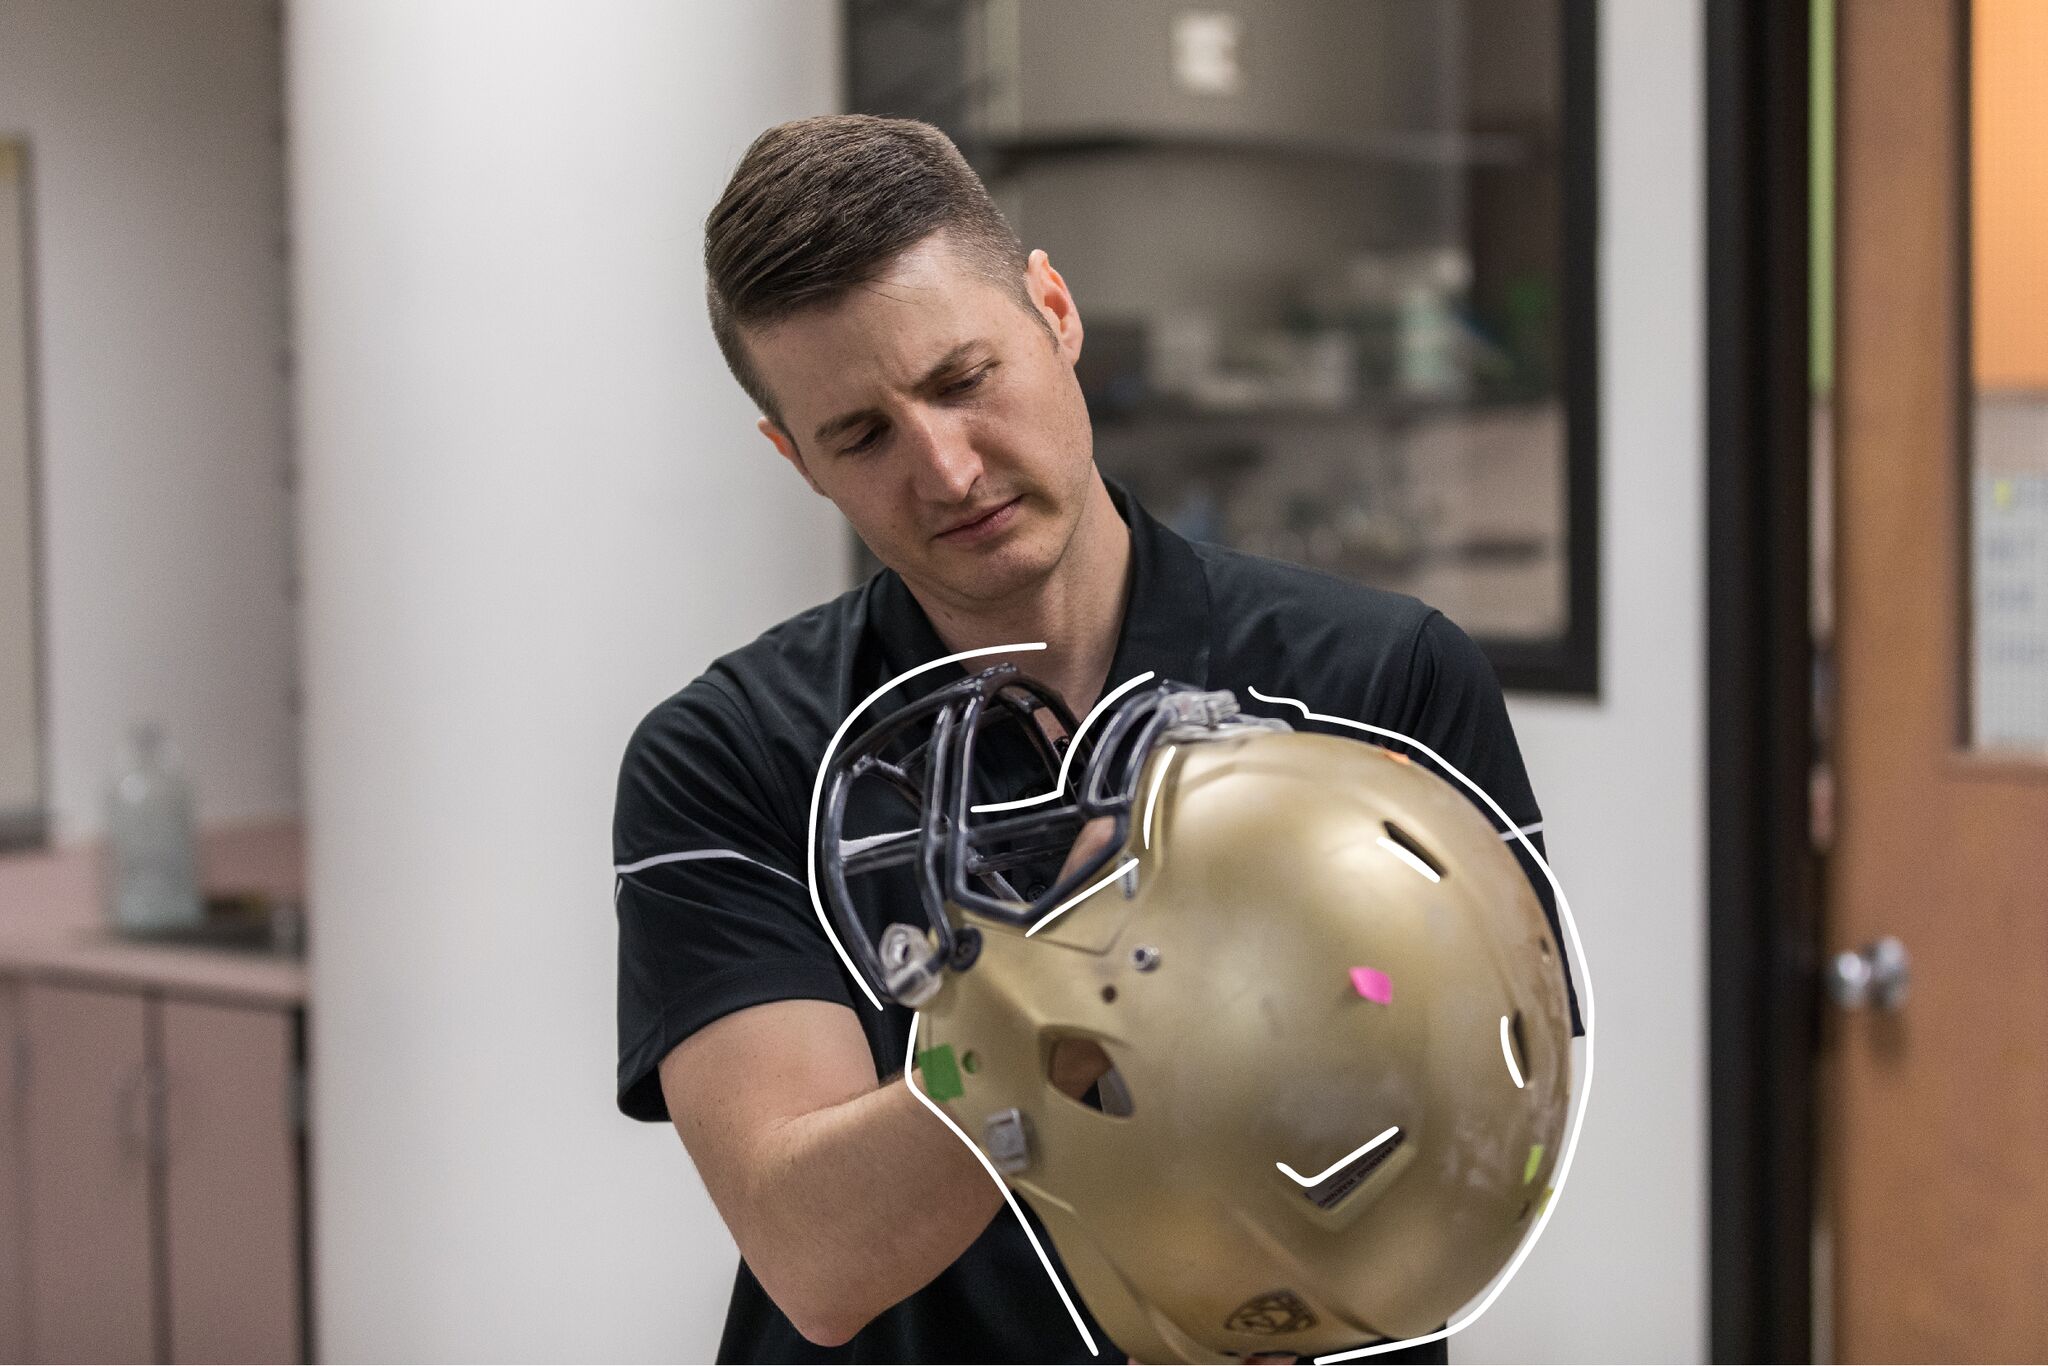 Associate Professor Chris Yakacki inspects a football helmet in the SMAB lab at CU Denver. His startup company uses a lab-developed liquid-crystal foam technology for a better football helmet. (Photo courtesy of CU Denver)